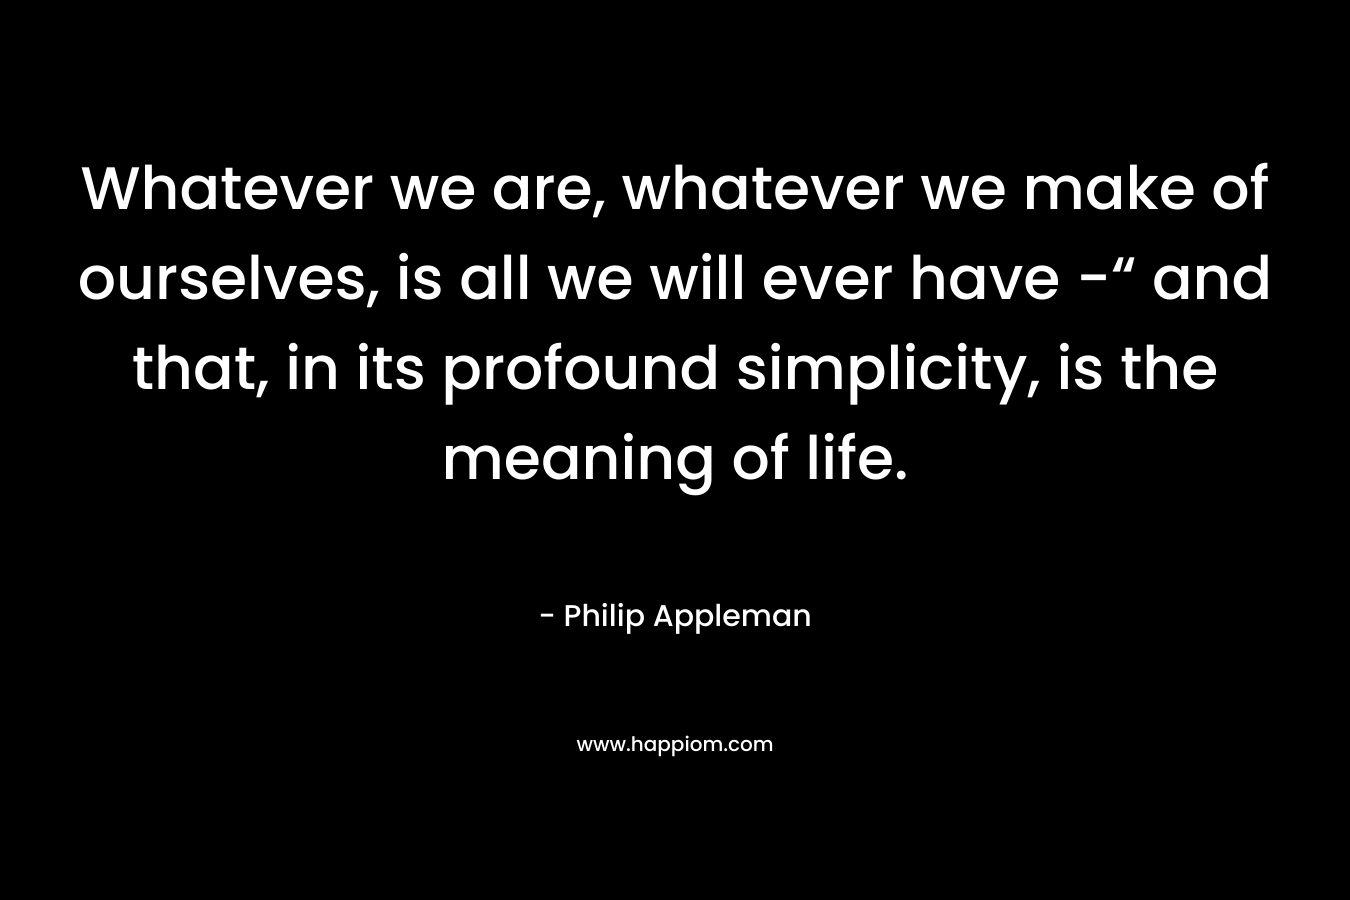 Whatever we are, whatever we make of ourselves, is all we will ever have -“ and that, in its profound simplicity, is the meaning of life. – Philip Appleman